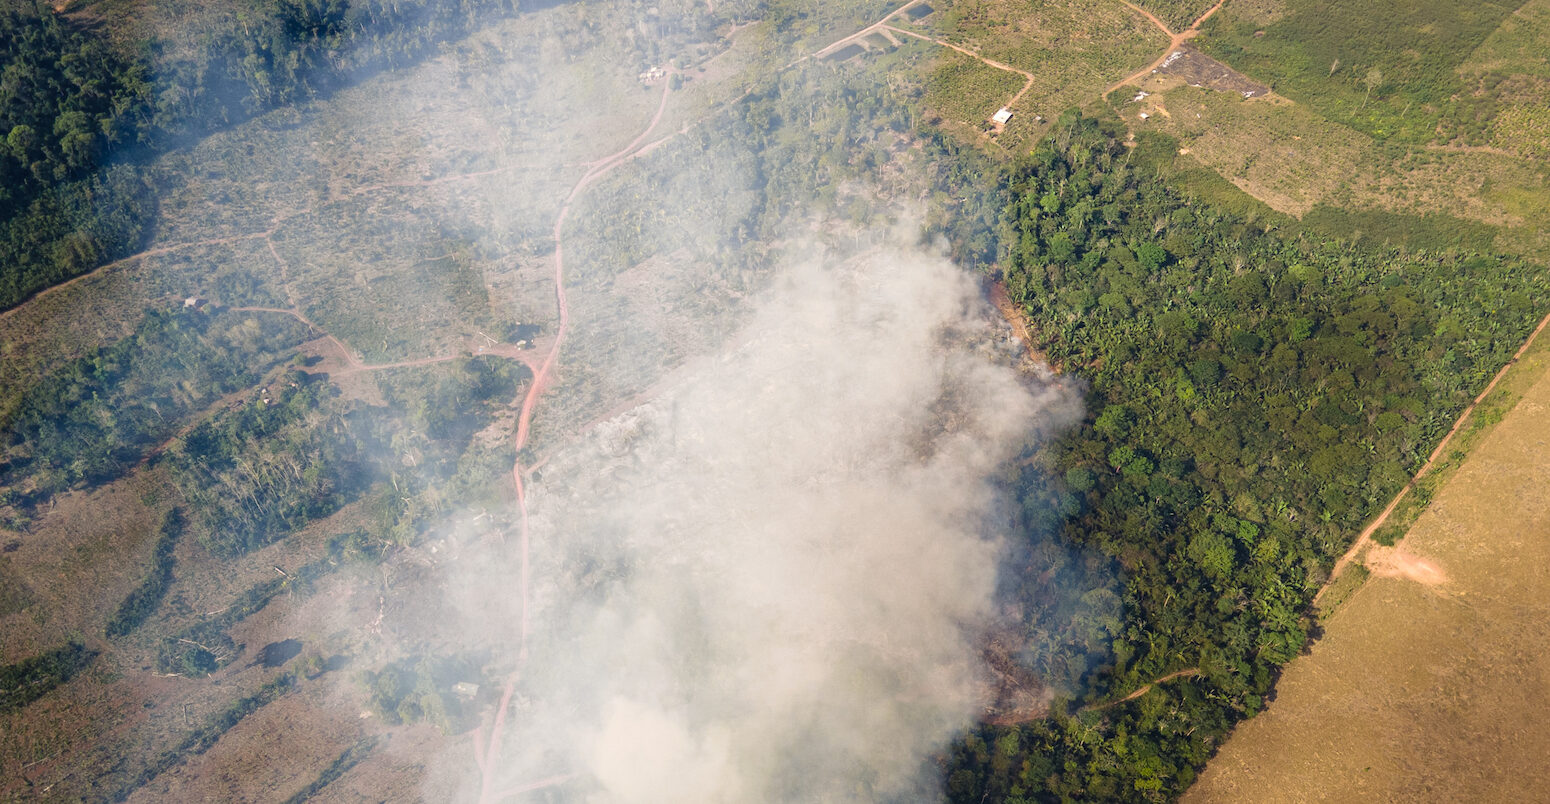 A drone shot of a fire in the Amazon forest.